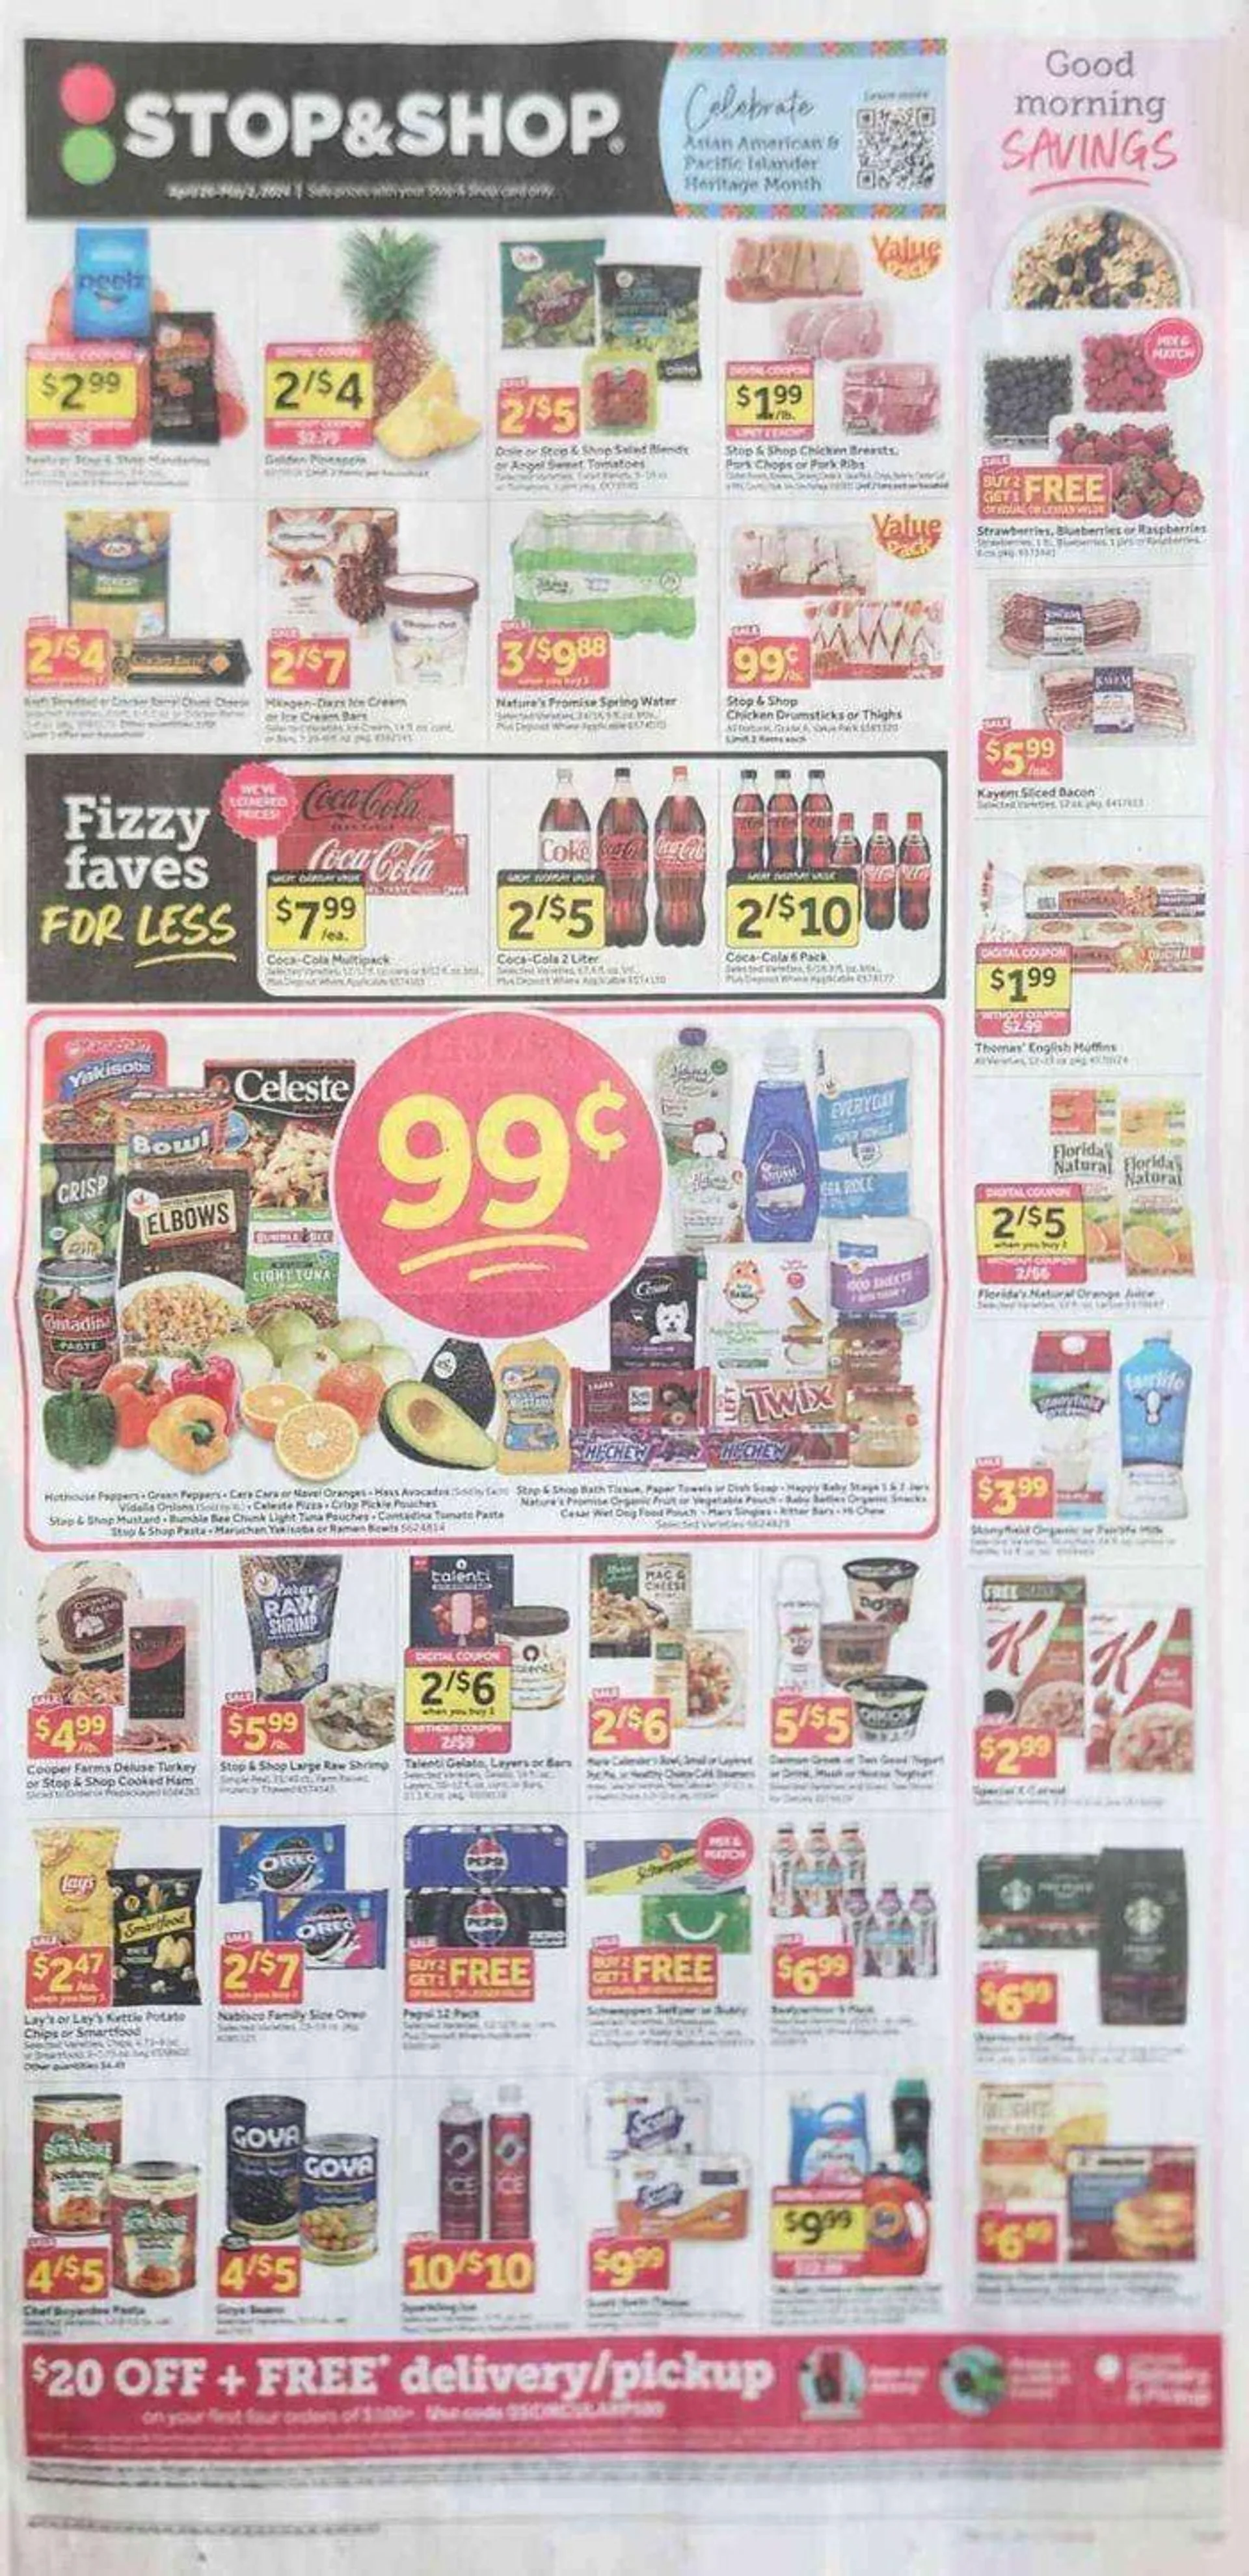 Weekly Ads Stop&Shop - 1